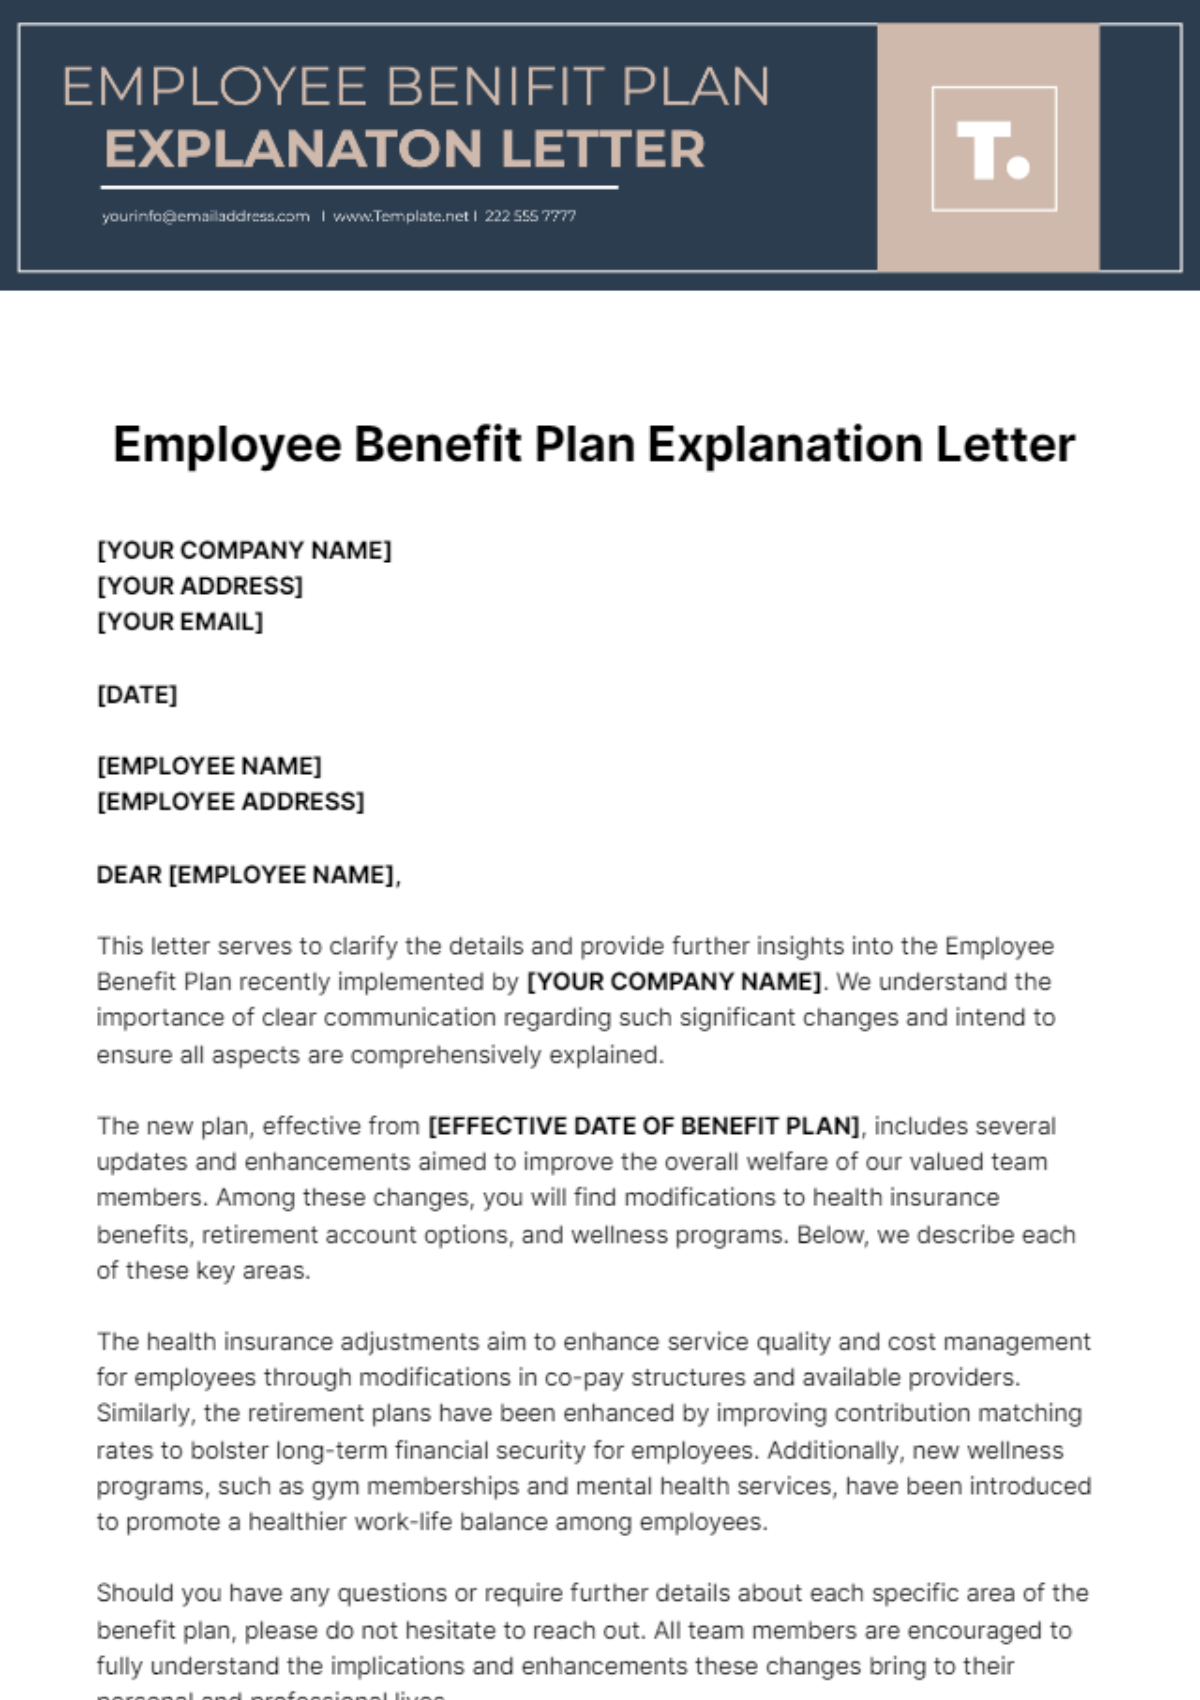 Employee Benefit Plan Explanation Letter Template